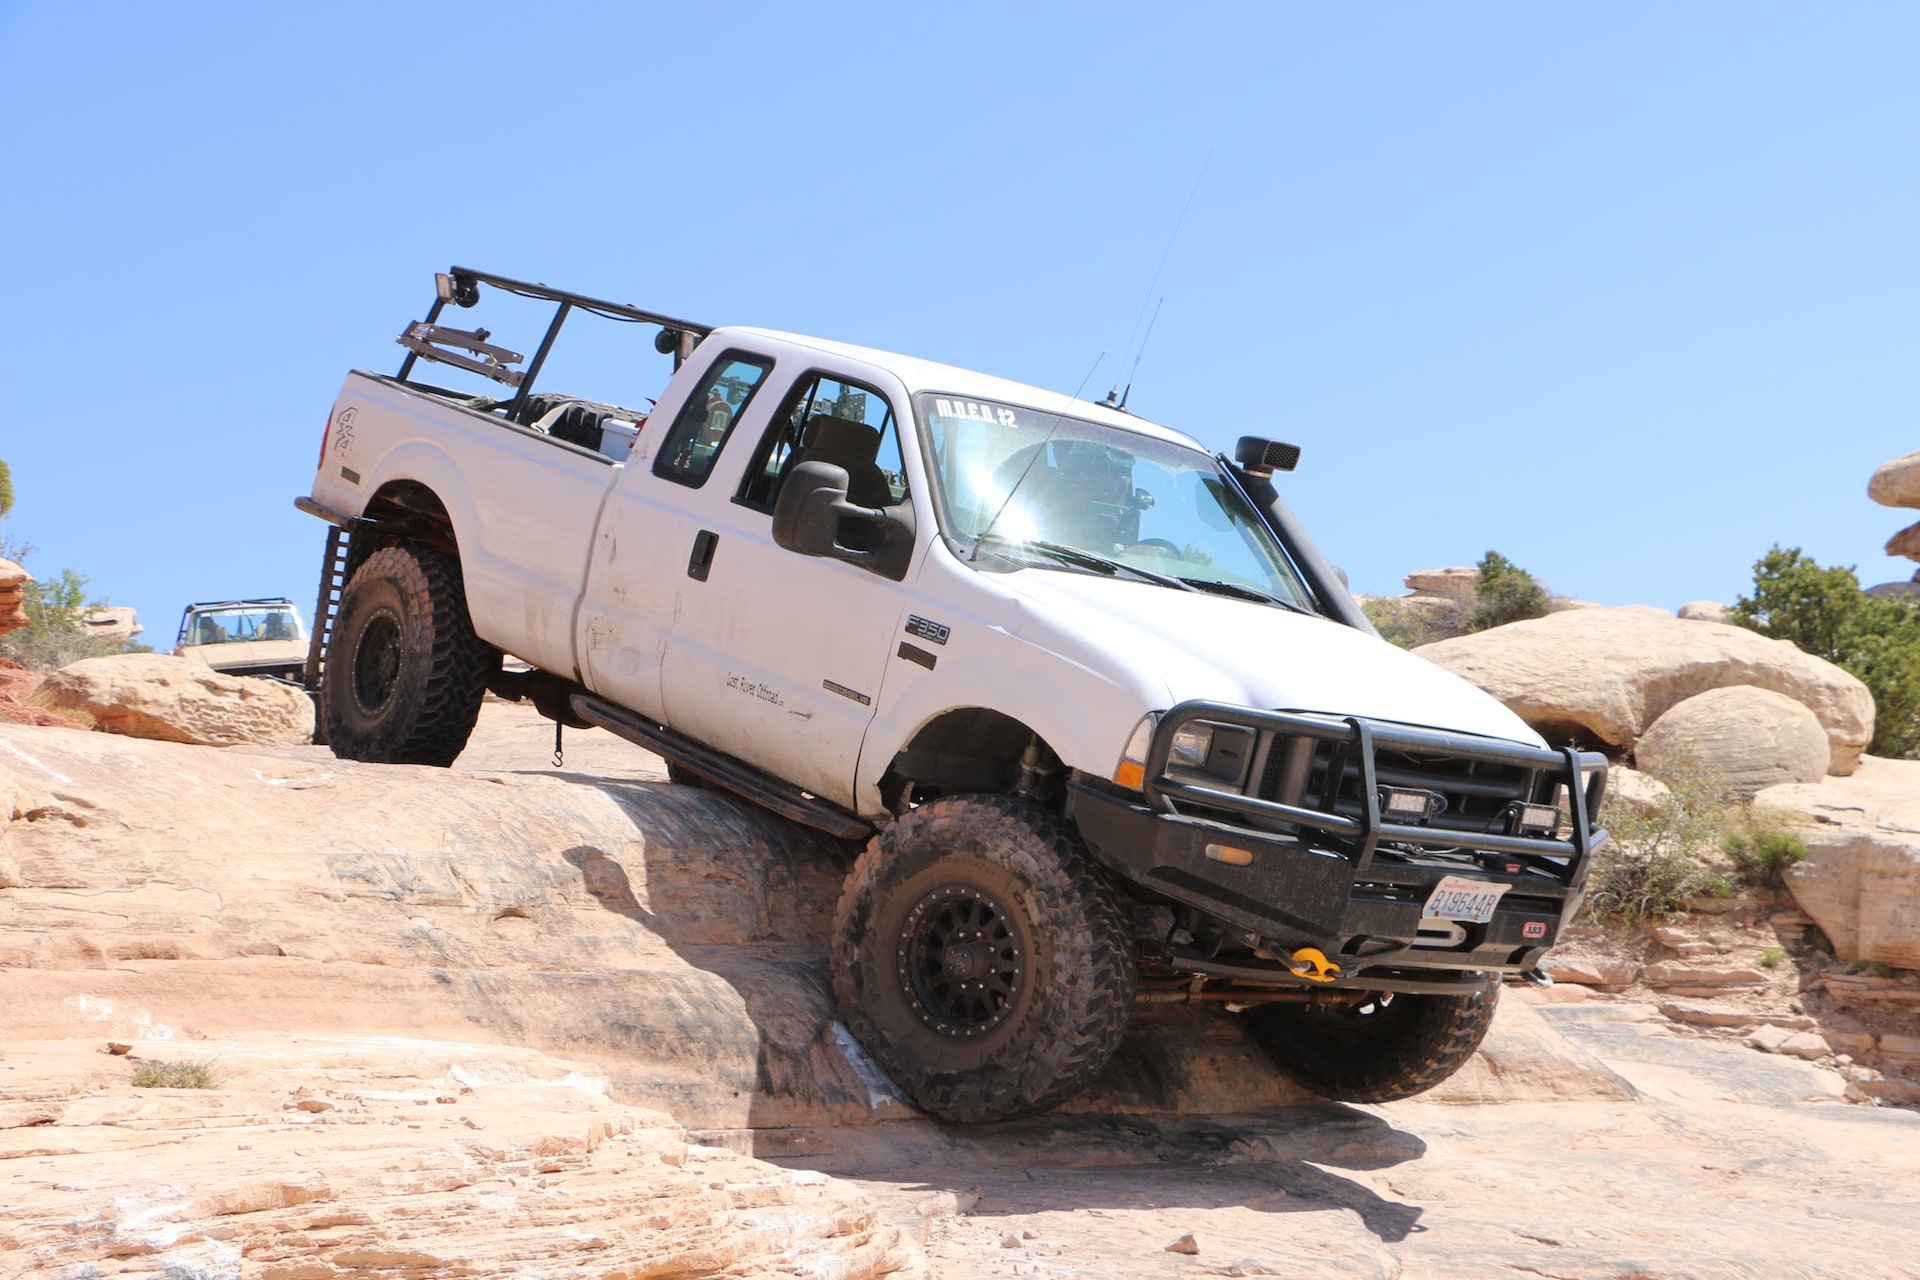 2002 Ford F-350: A Rockcrawler And Overlander In One